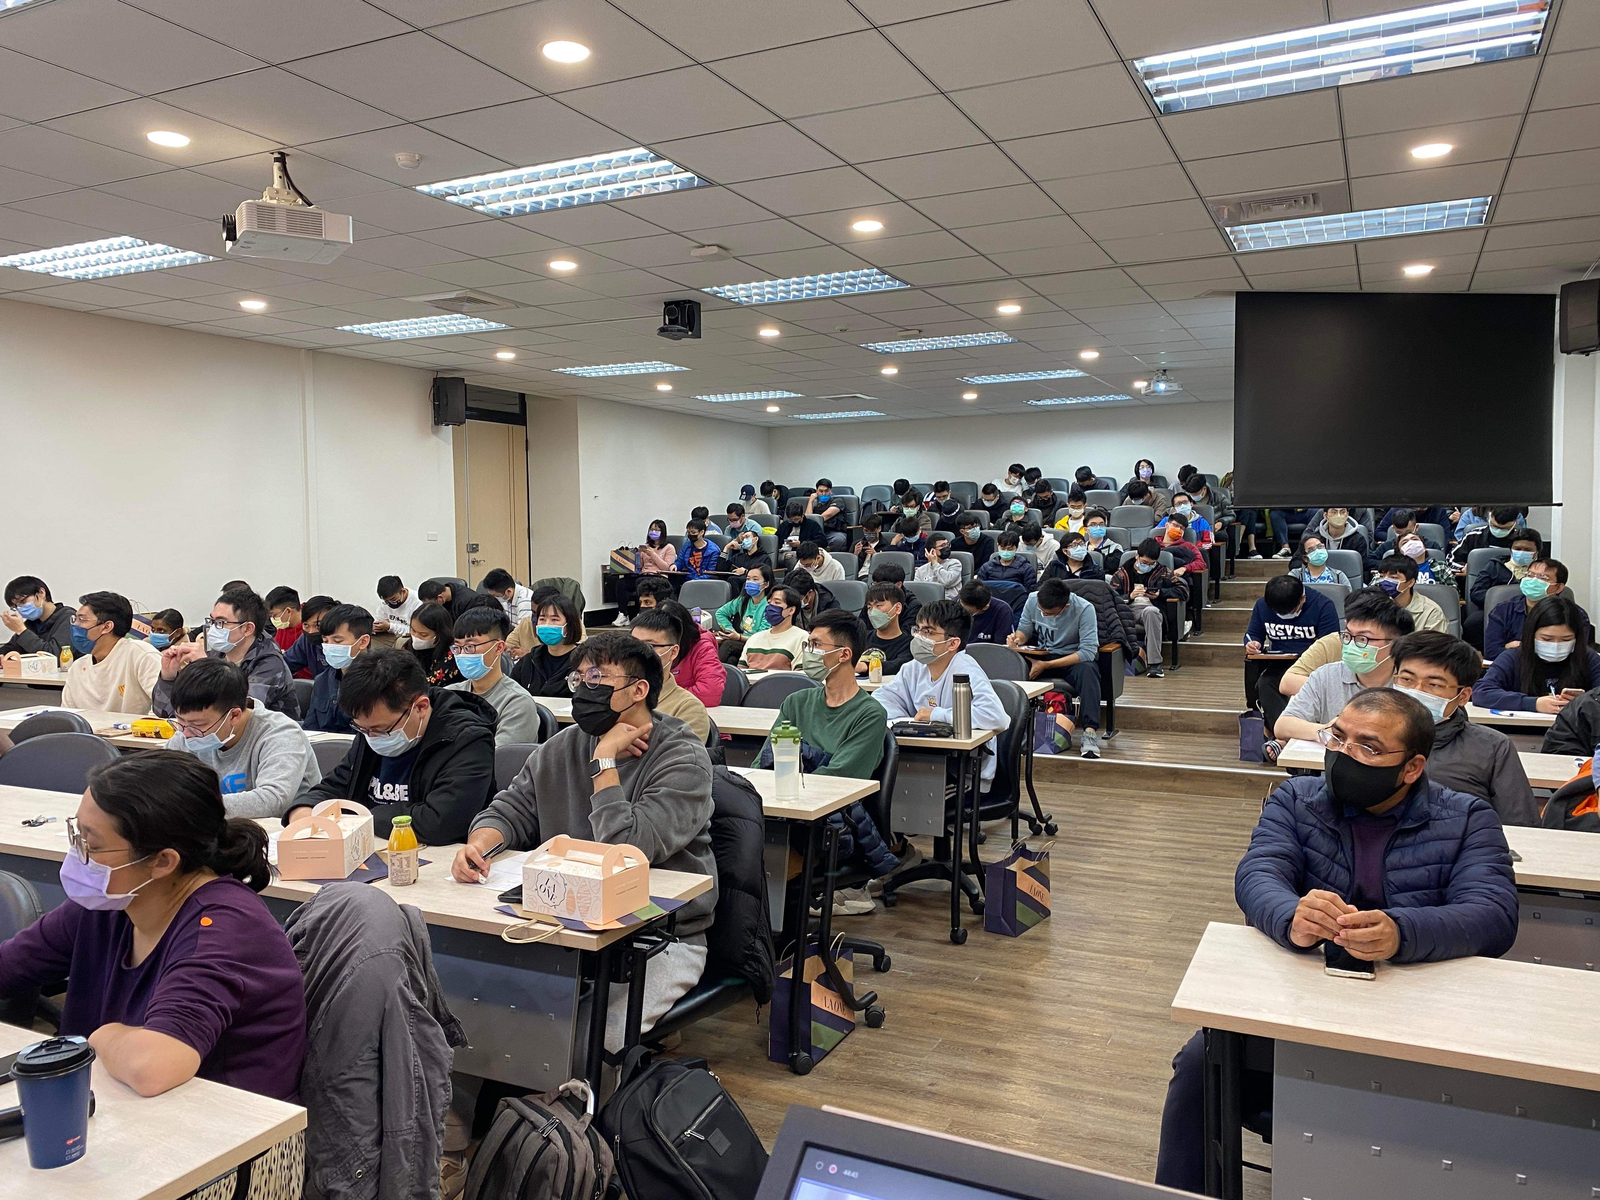 The Institute of Communications Engineering at NSYSU, the British Office Taipei, and the Ministry of Science and Technology organized the UK-Taiwan Joint Hybrid Seminar, attracting over a hundred participants.